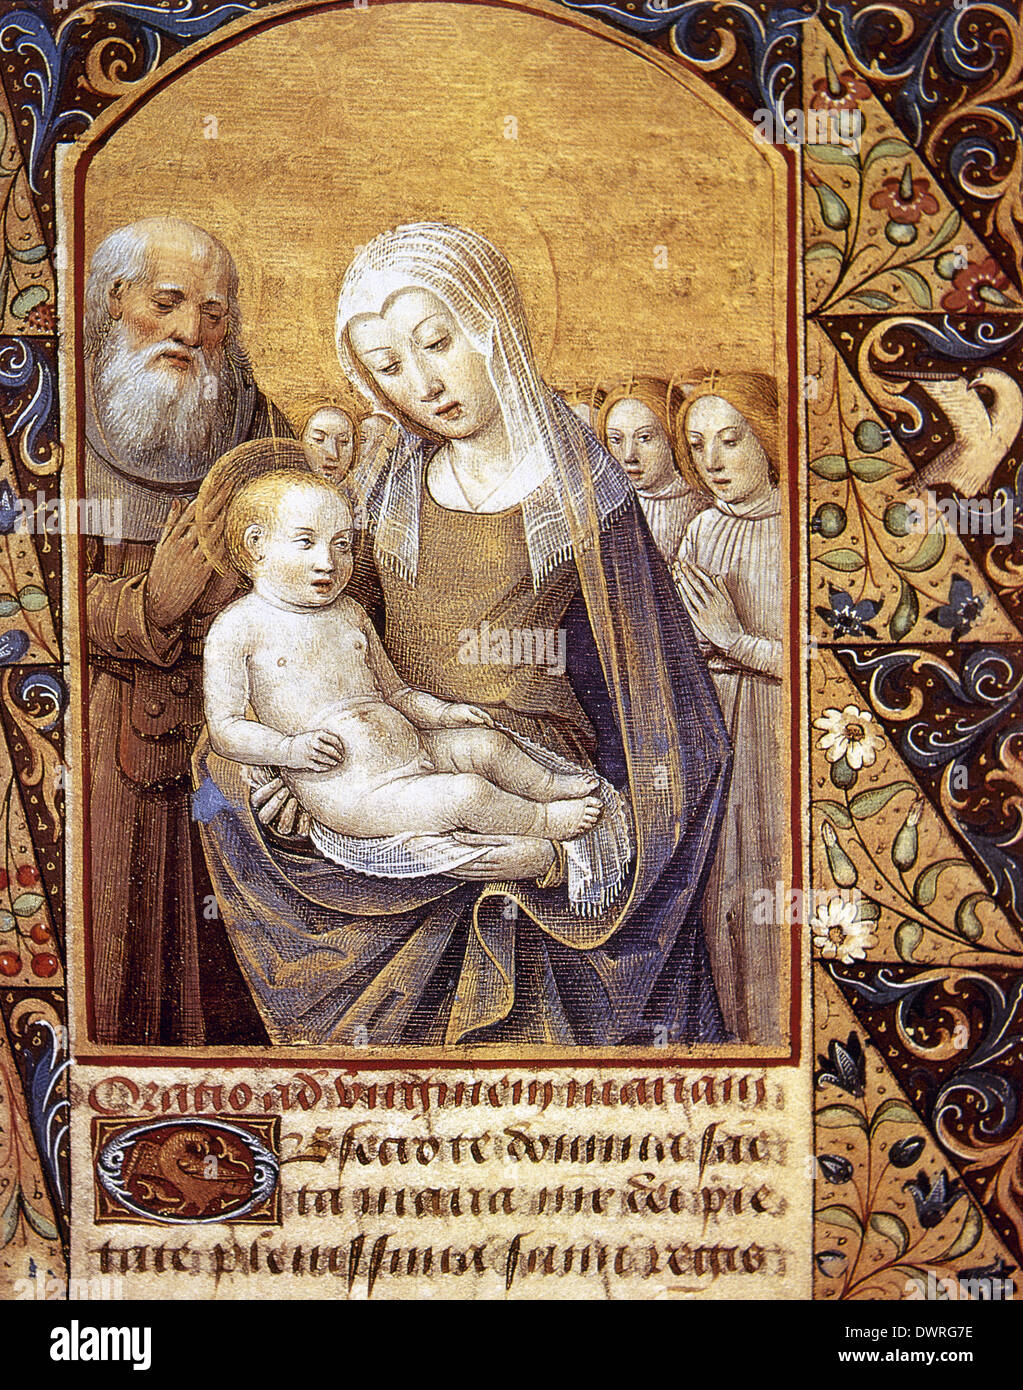 The Virgin Mary with Infant Jesus, Saint Joseph and angels. Miniature. Book of Hours. Life of the Virgin. Stock Photo